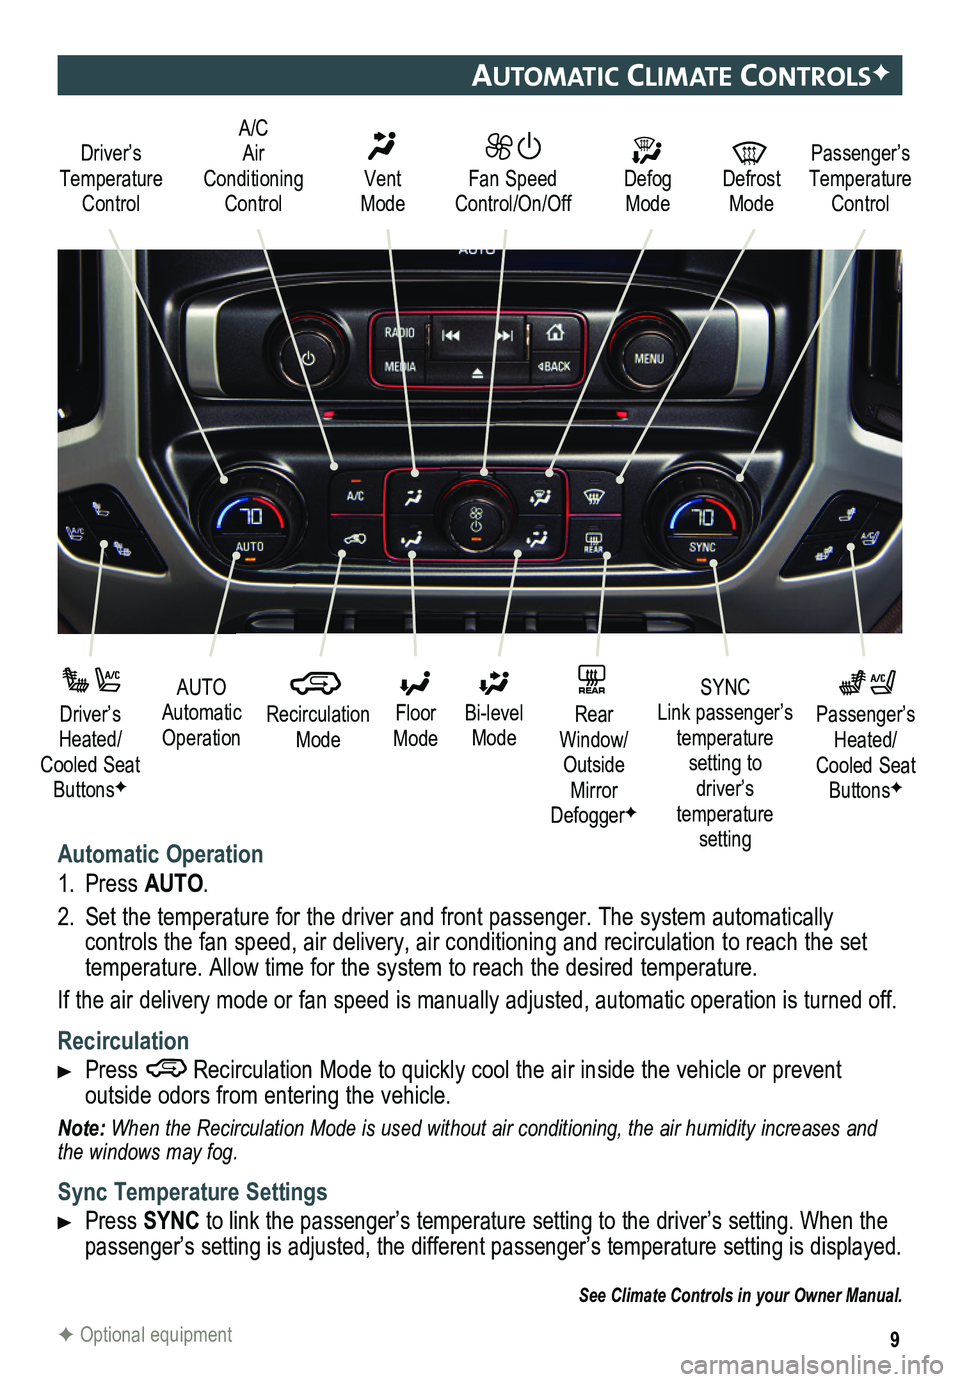 GMC SIERRA HD 2015  Get To Know Guide 9
automatIc clImate controlsF
Automatic Operation
1. Press AUTO.
2. Set the temperature for the driver and front passenger. The system autom\
atically  
controls the fan speed, air delivery, air condi